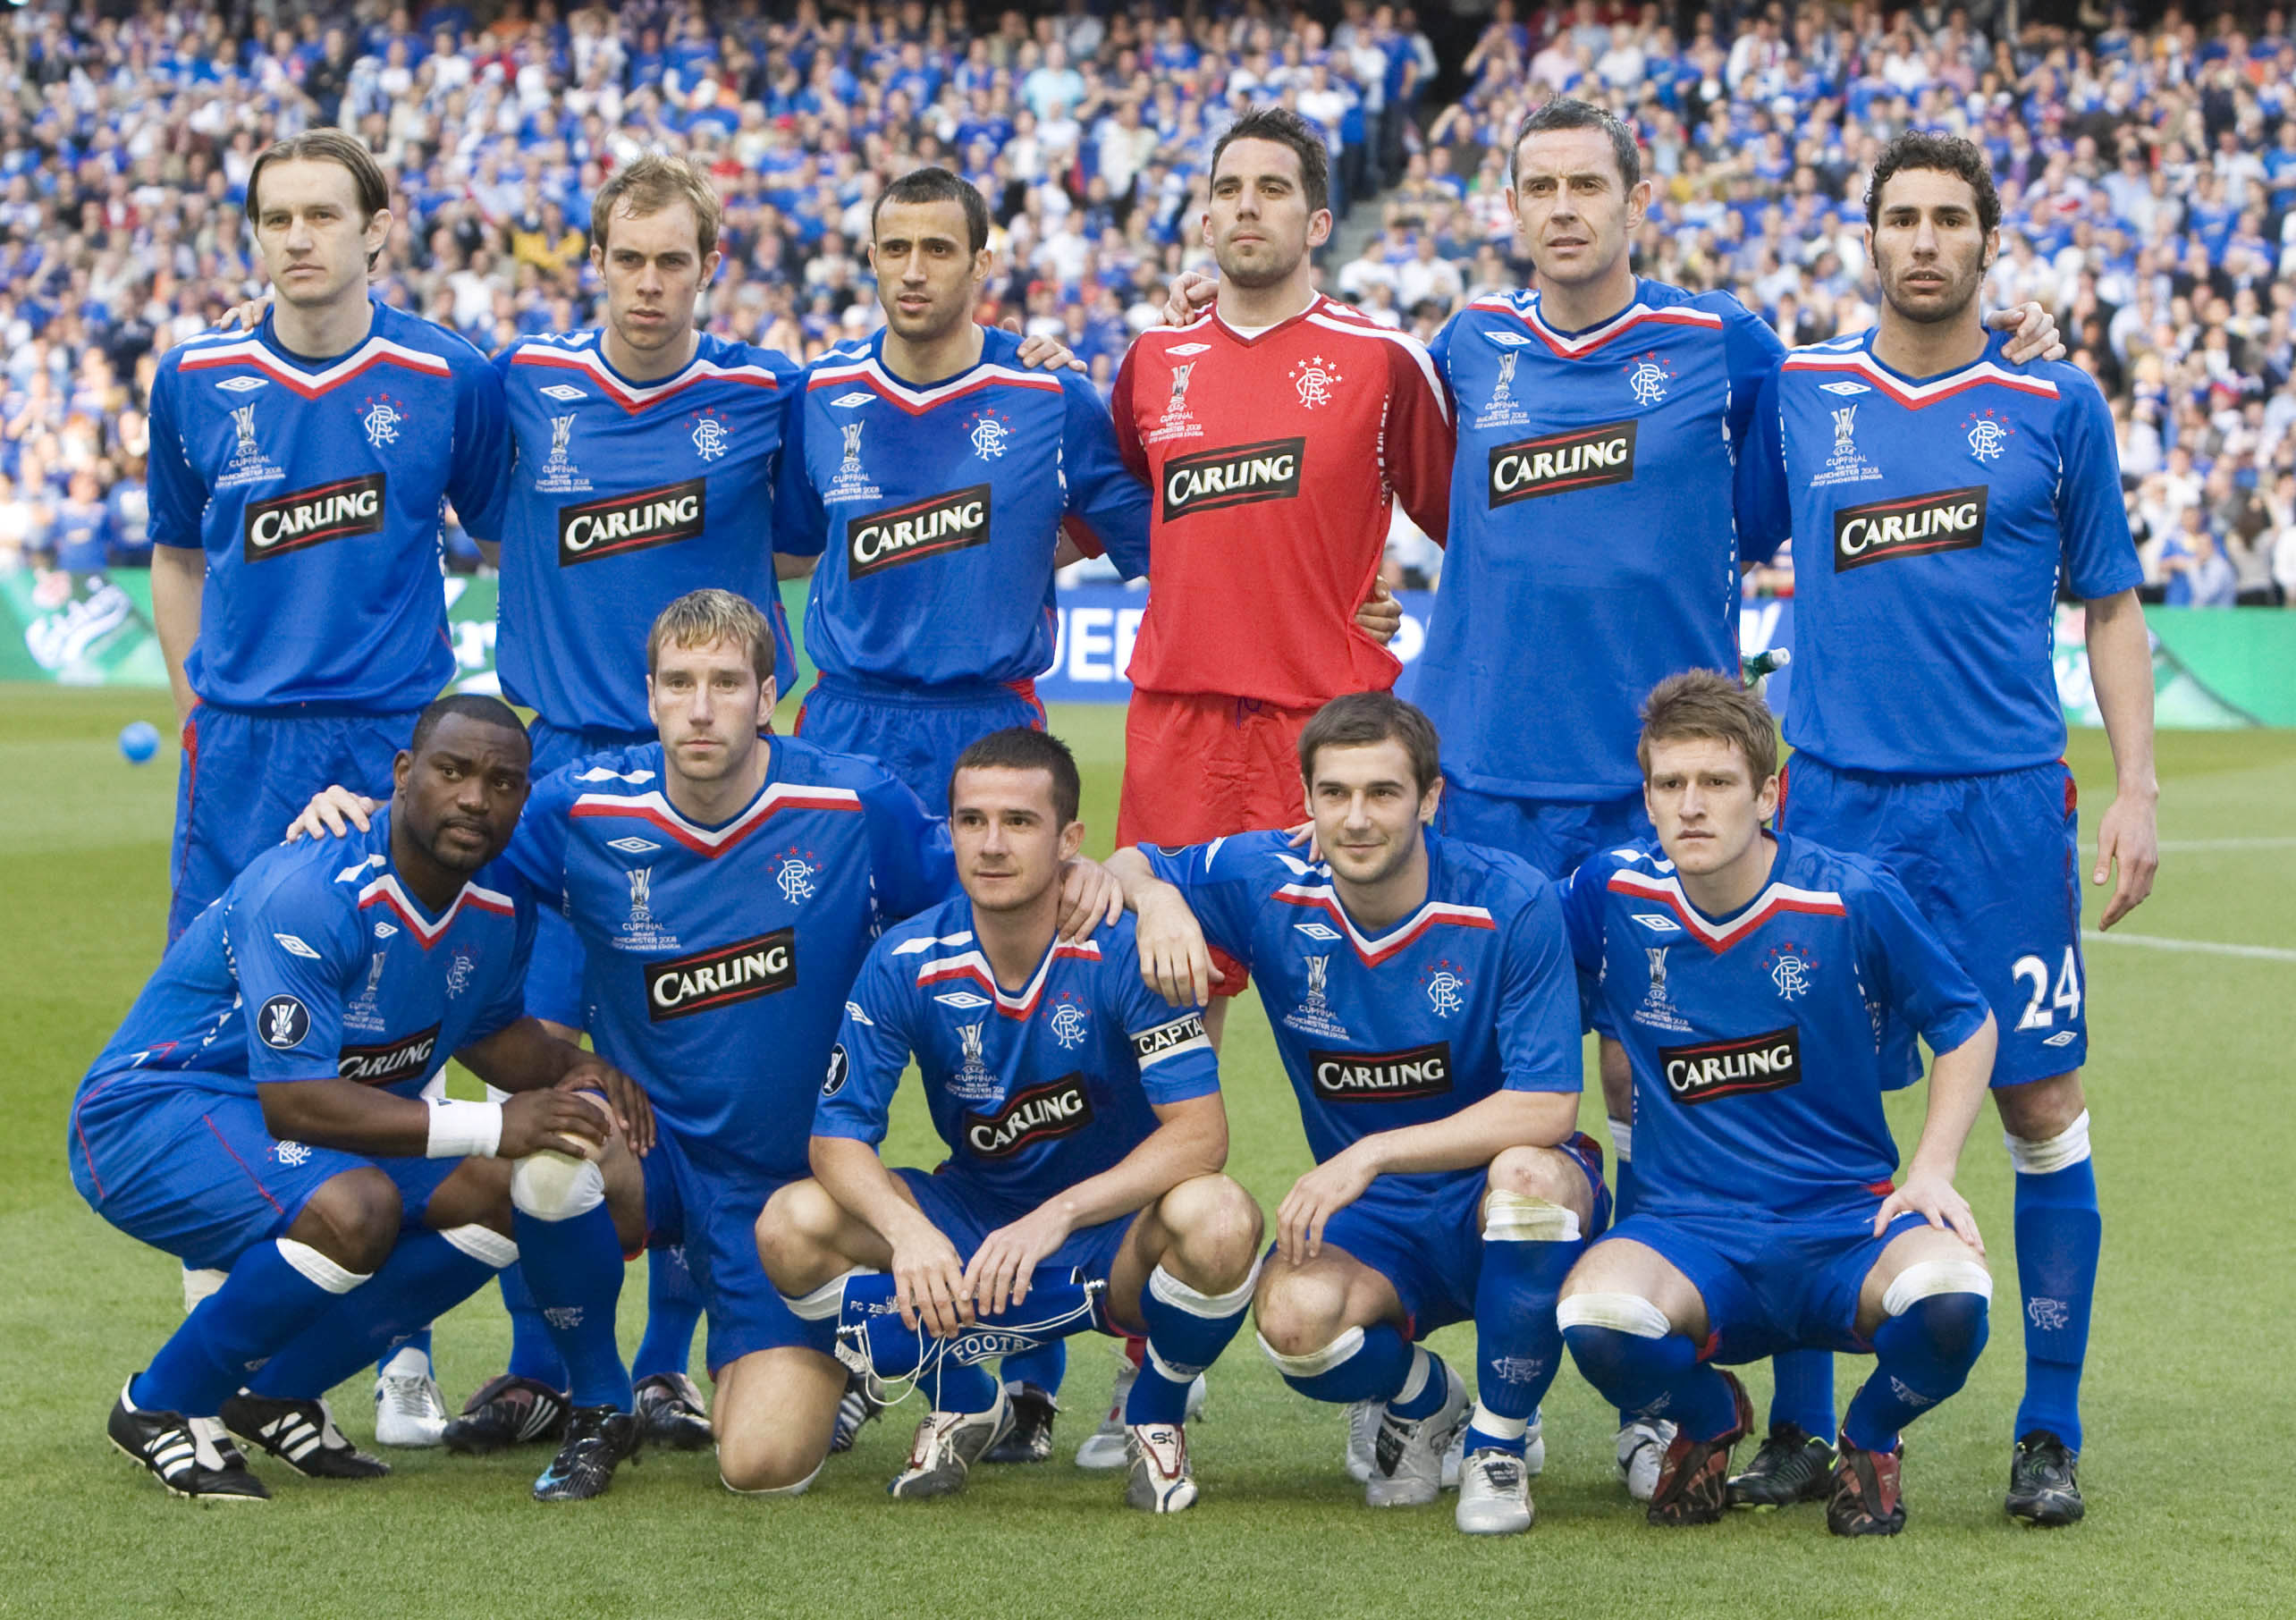 The Rangers players line up before kick-off. Back row from left: Sasa Papac, Steven Whittaker, Brahim Hemdani, Neil Alexander, David Weir and Carlos Cuellar. Front row from left: Jean-Claude Darcheville, Kirk Broadfoot, Barry Ferguson, Kevin Thomson and Steven Davis.